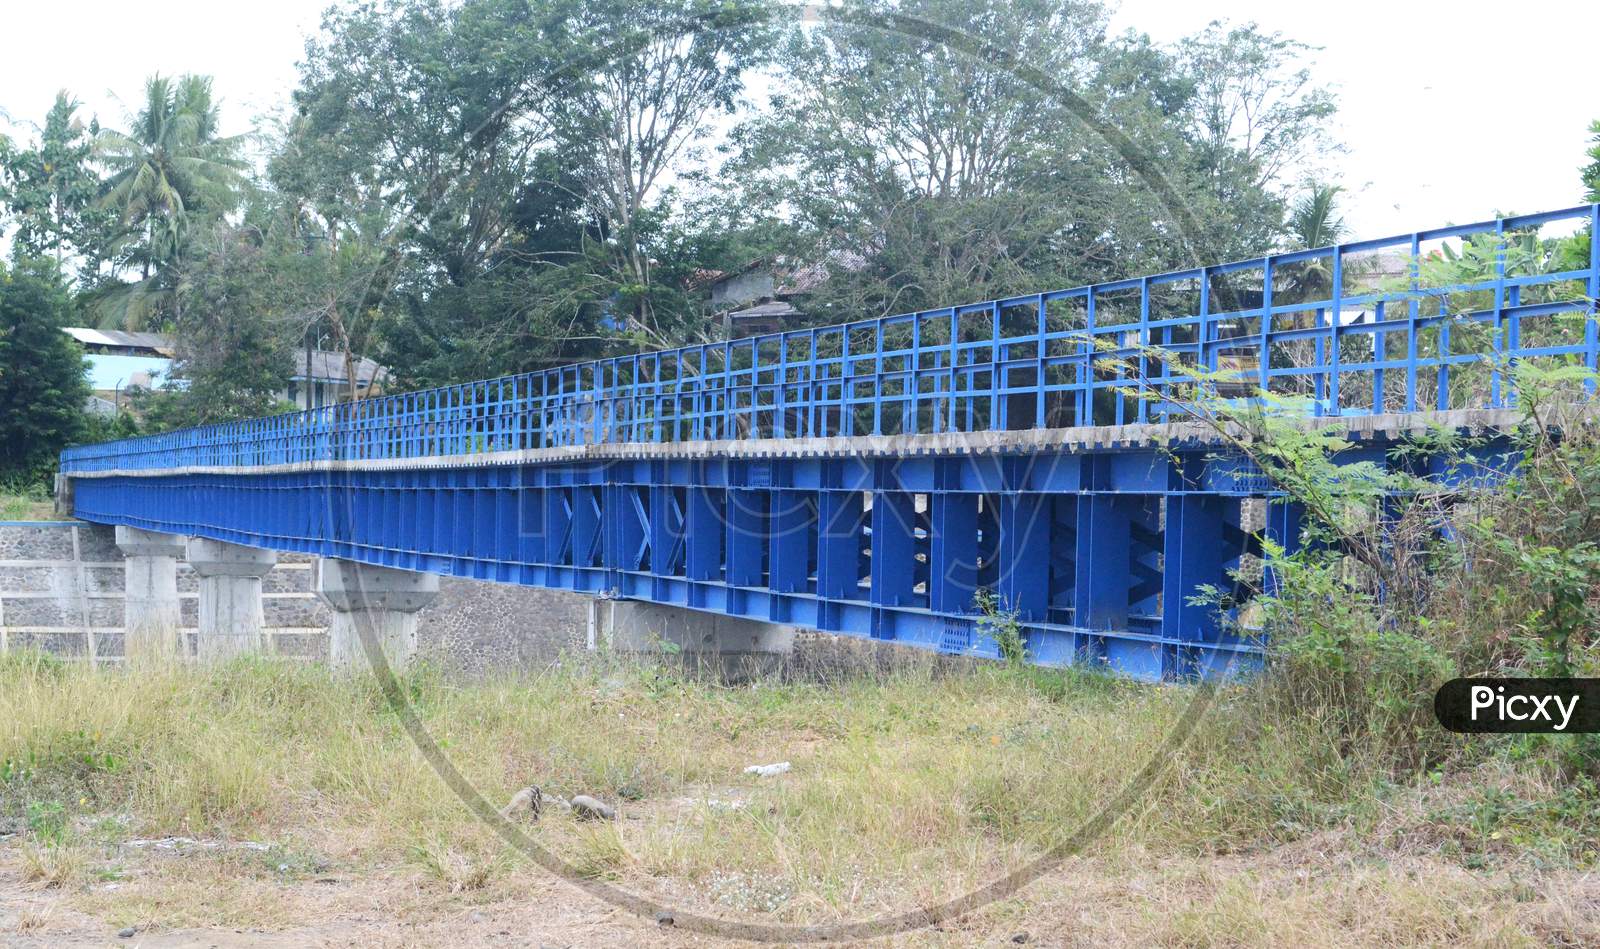 Long Iron Bridge Building In Blue Paint Connecting The Two Regions